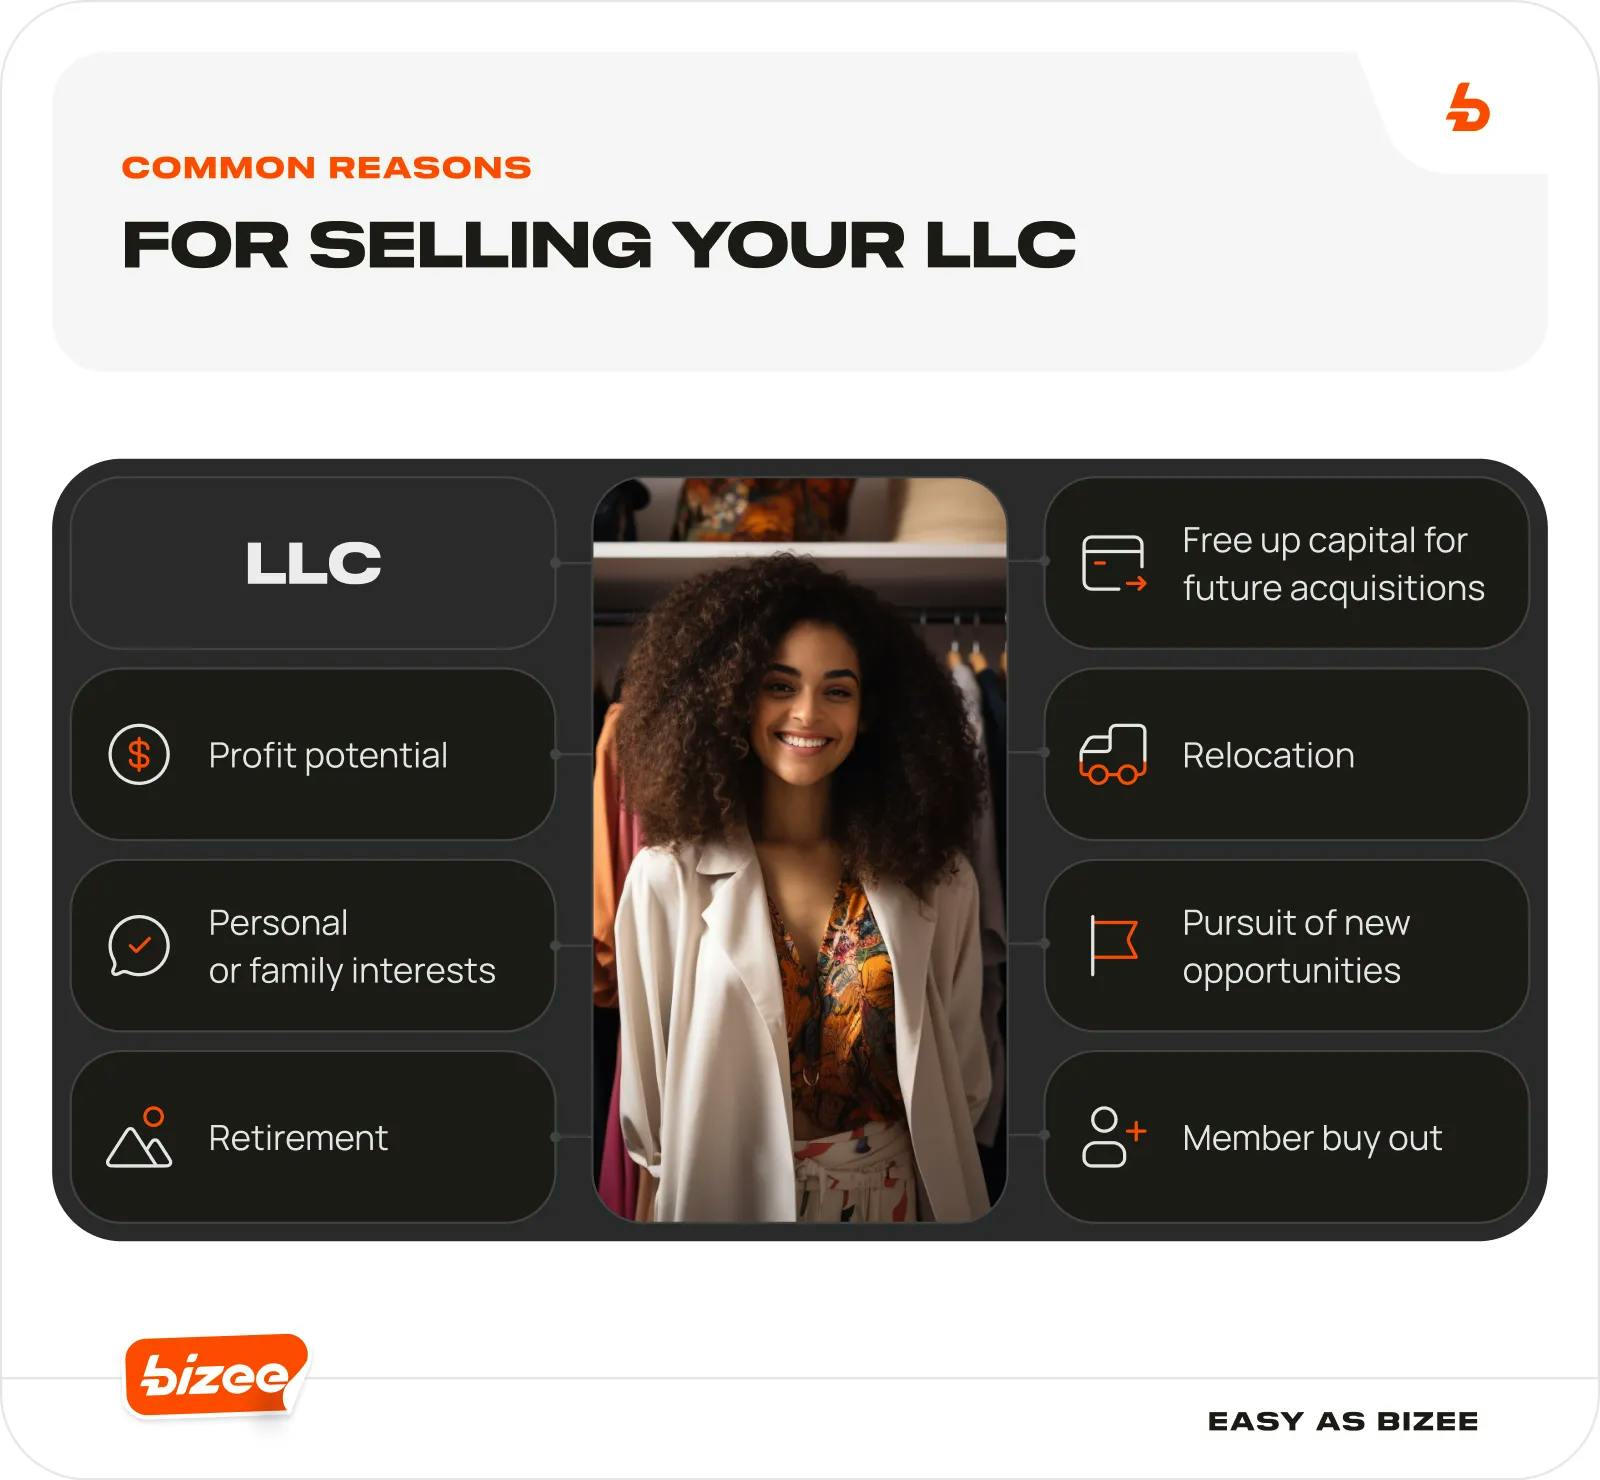 Common Reasons for Selling Your LLC